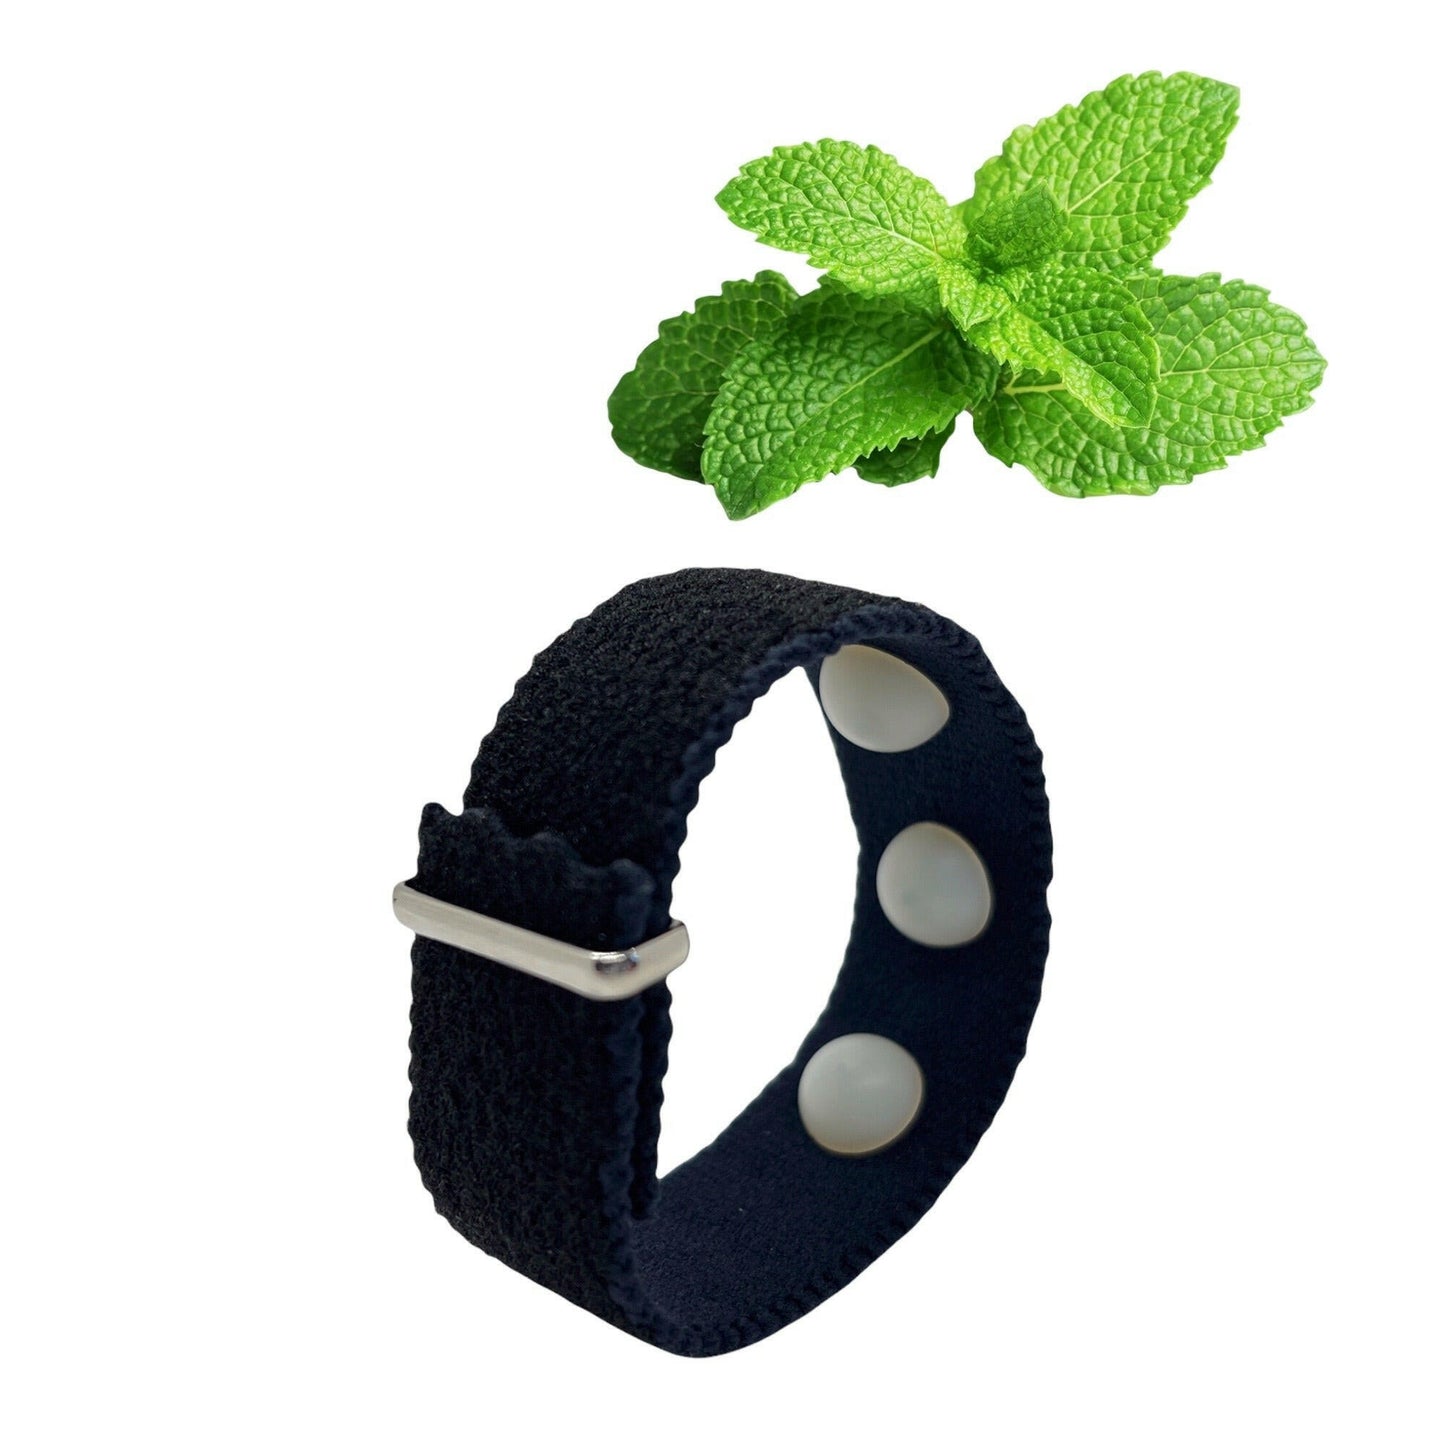 Scented Anti Nausea Bracelet with Peppermint Oil-Headache Relief-Hot Flashes-Anxiety-Single - Acupressure Bracelets